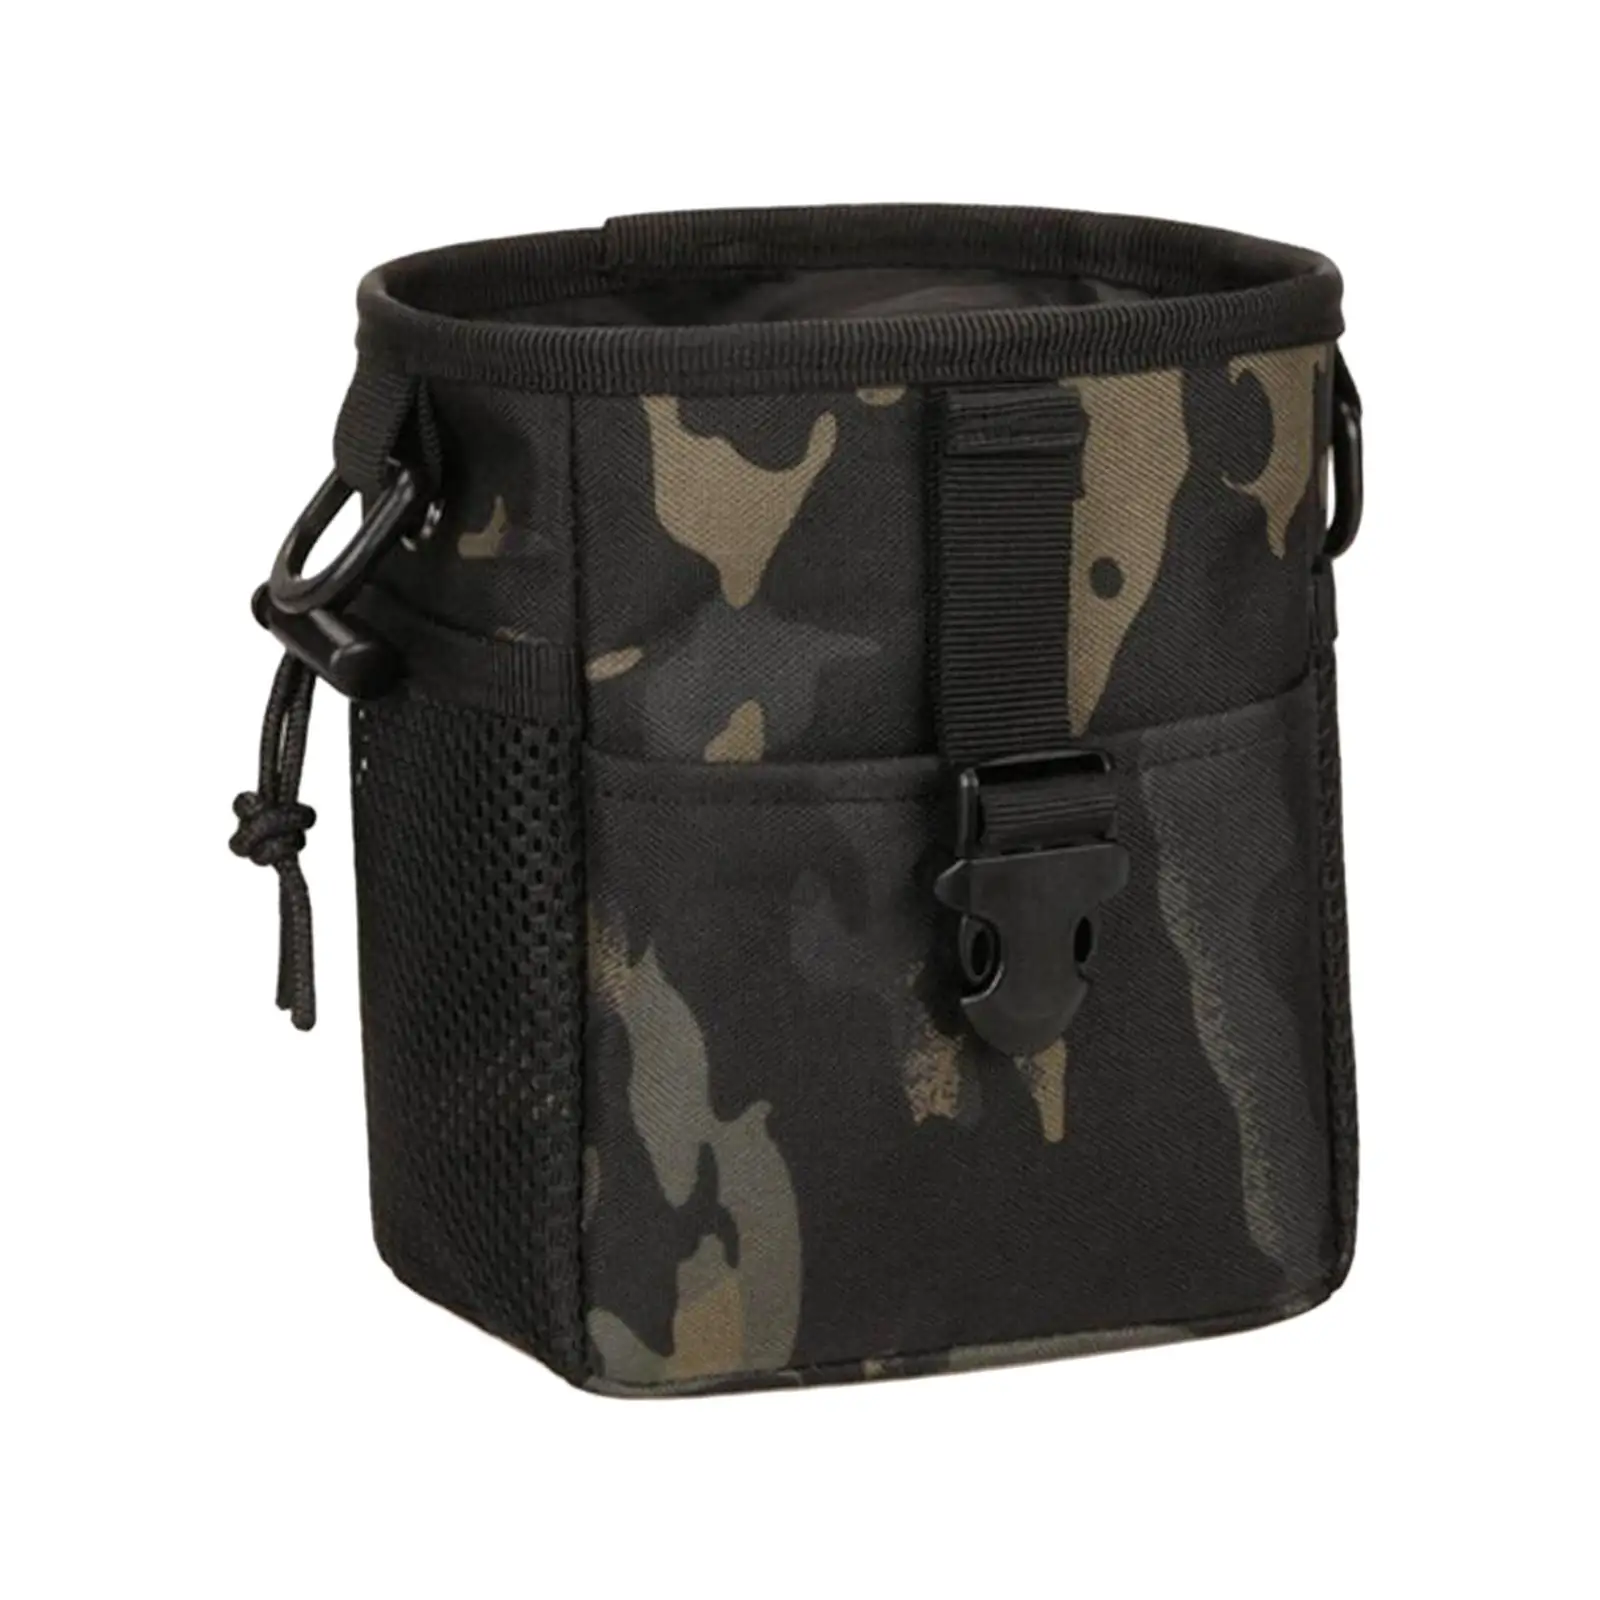 Pouch Bag Accessories Multifunction Durable Hanging for Outdoor Tool Hunting